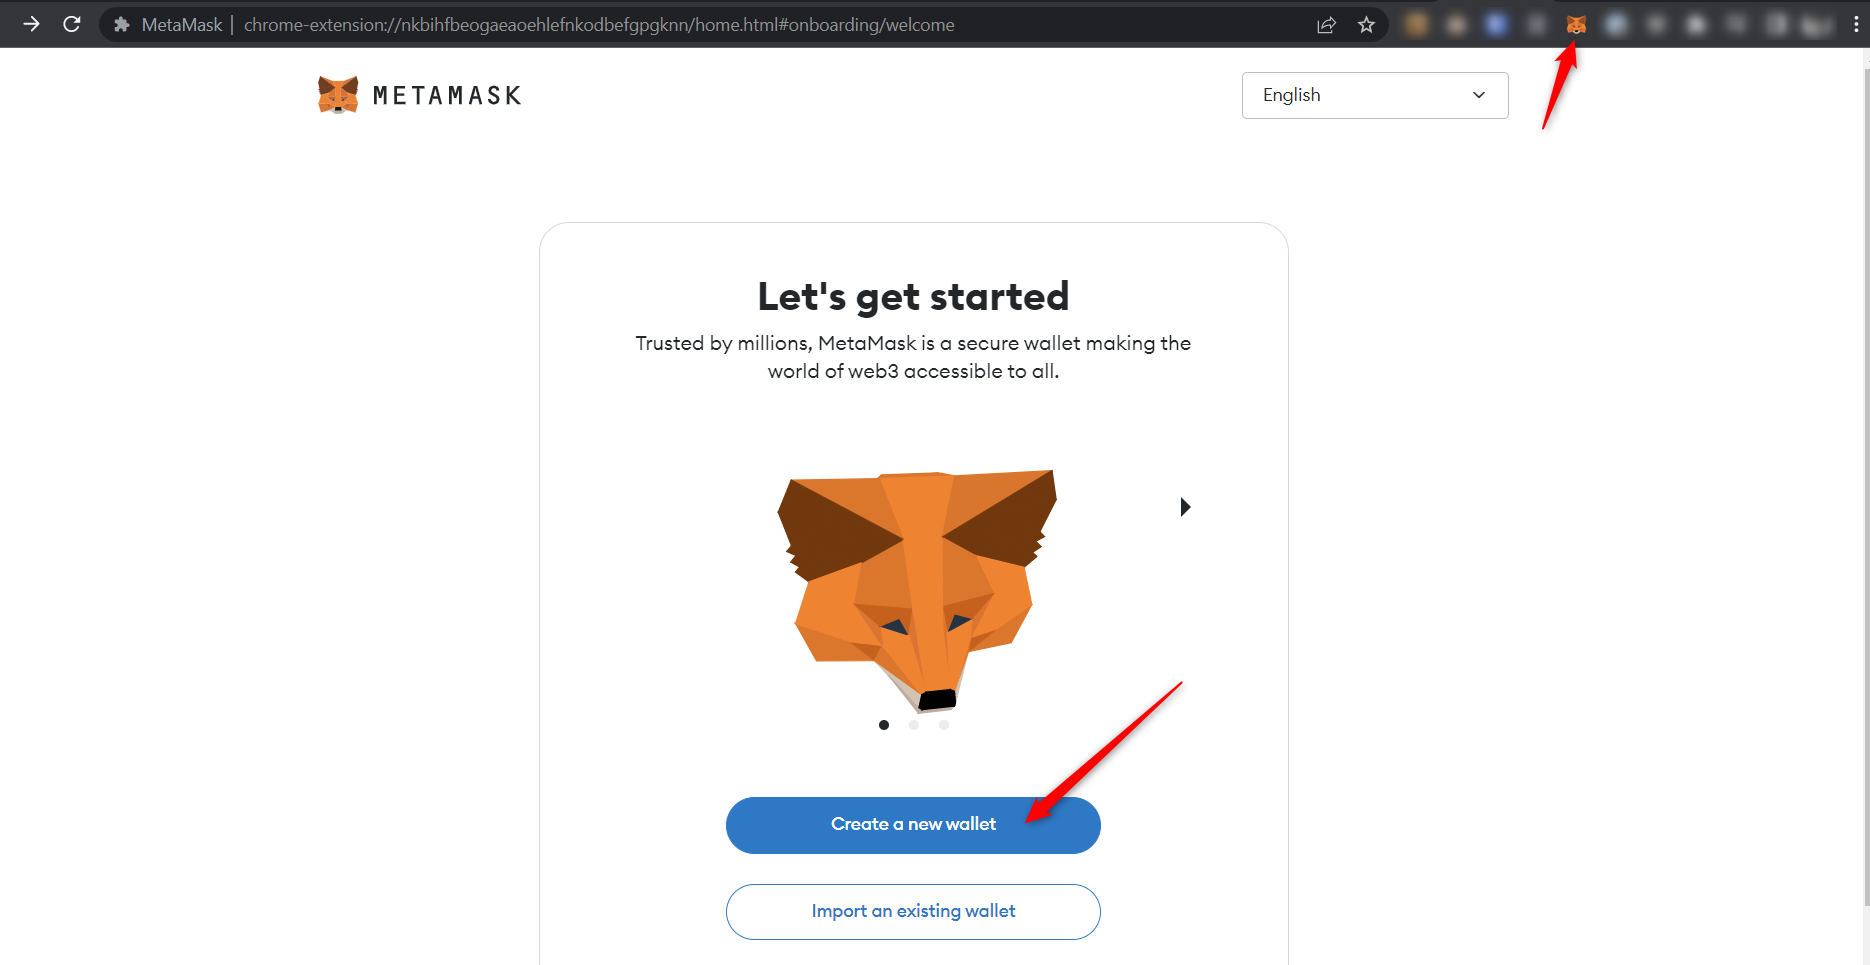 How to Connect Ledger to MetaMask - Dappgrid